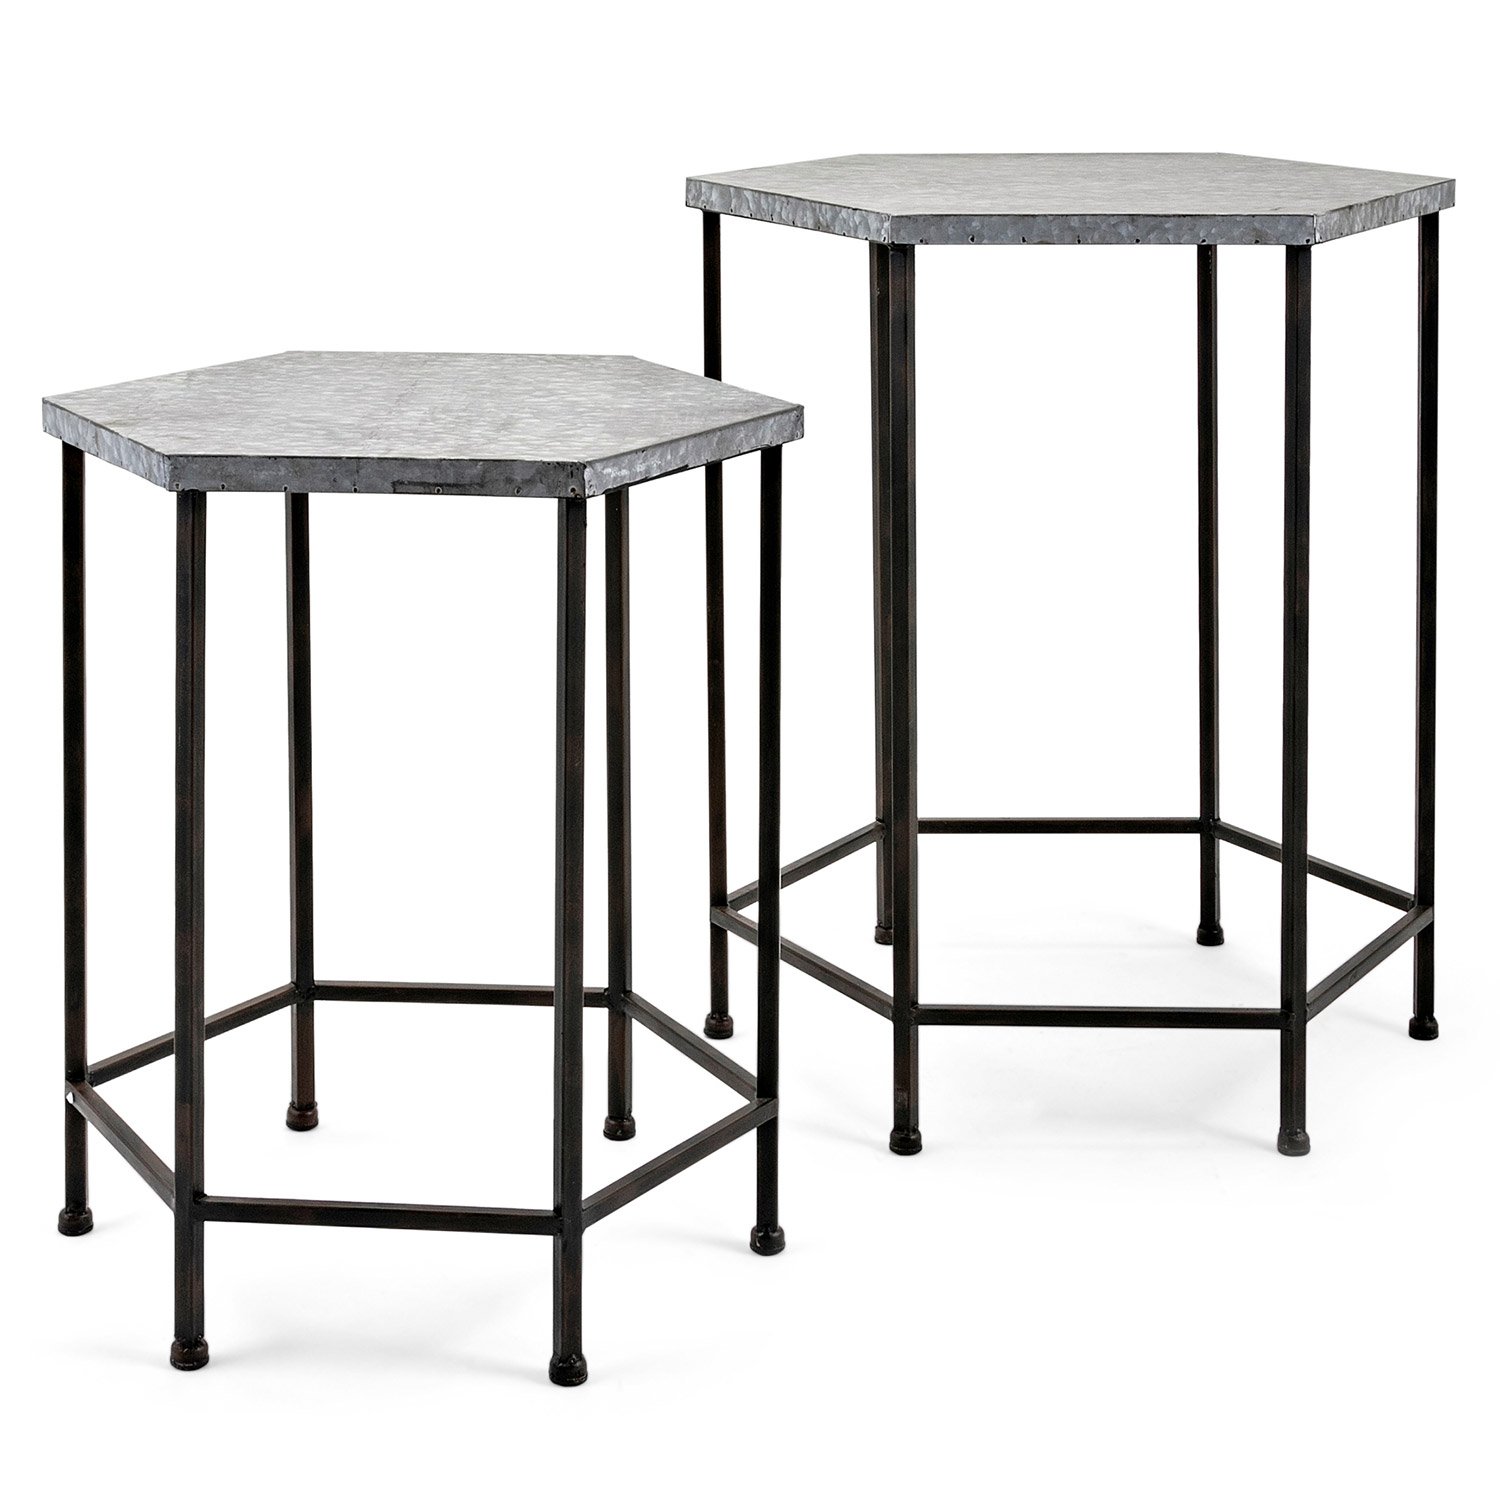 galvanized accent table set paynes gray metal concrete look outdoor furniture bar towels carpet transition piece laura ashley dining chairs corner nightstand antique pedestal side